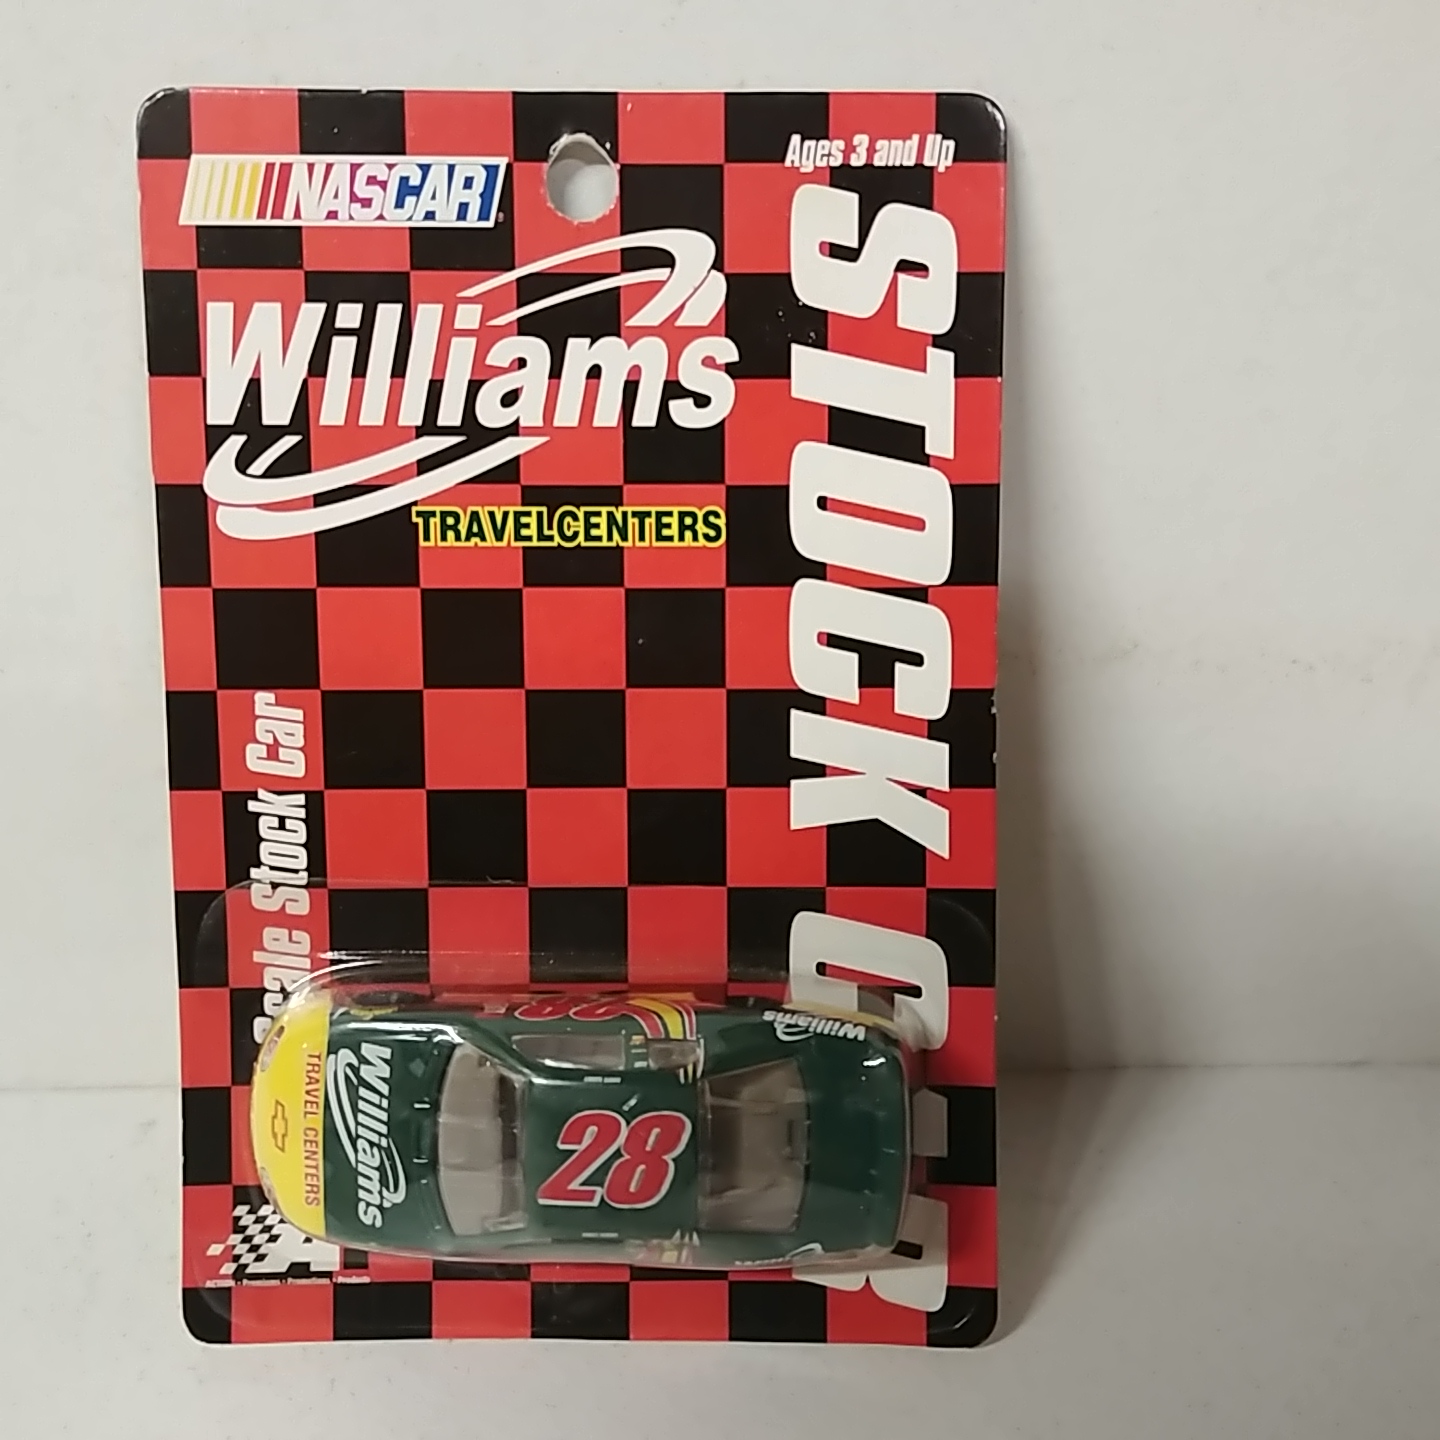 1999 Andy Kirby 1/64th Williams Travel Centers car